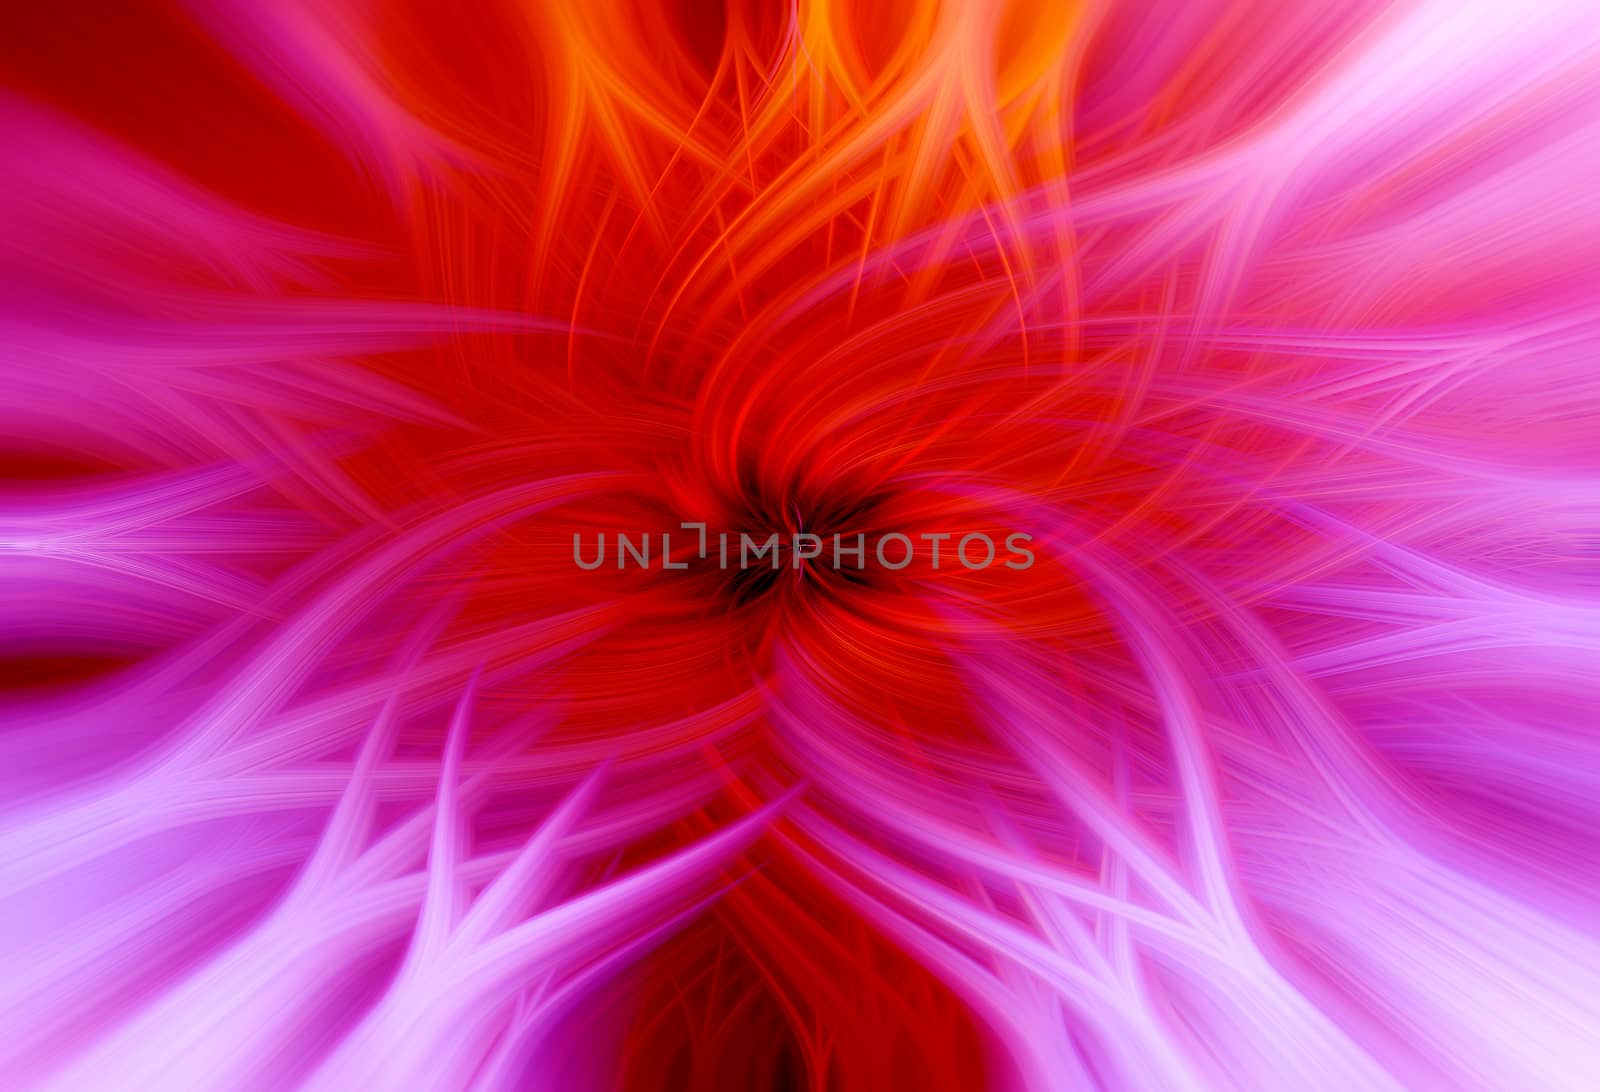 Beautiful abstract intertwined 3d fibers forming an ornament out of various symmetrical shapes. Flower shape in the middle. Purple, pink, red, yellow colors. Illustration.